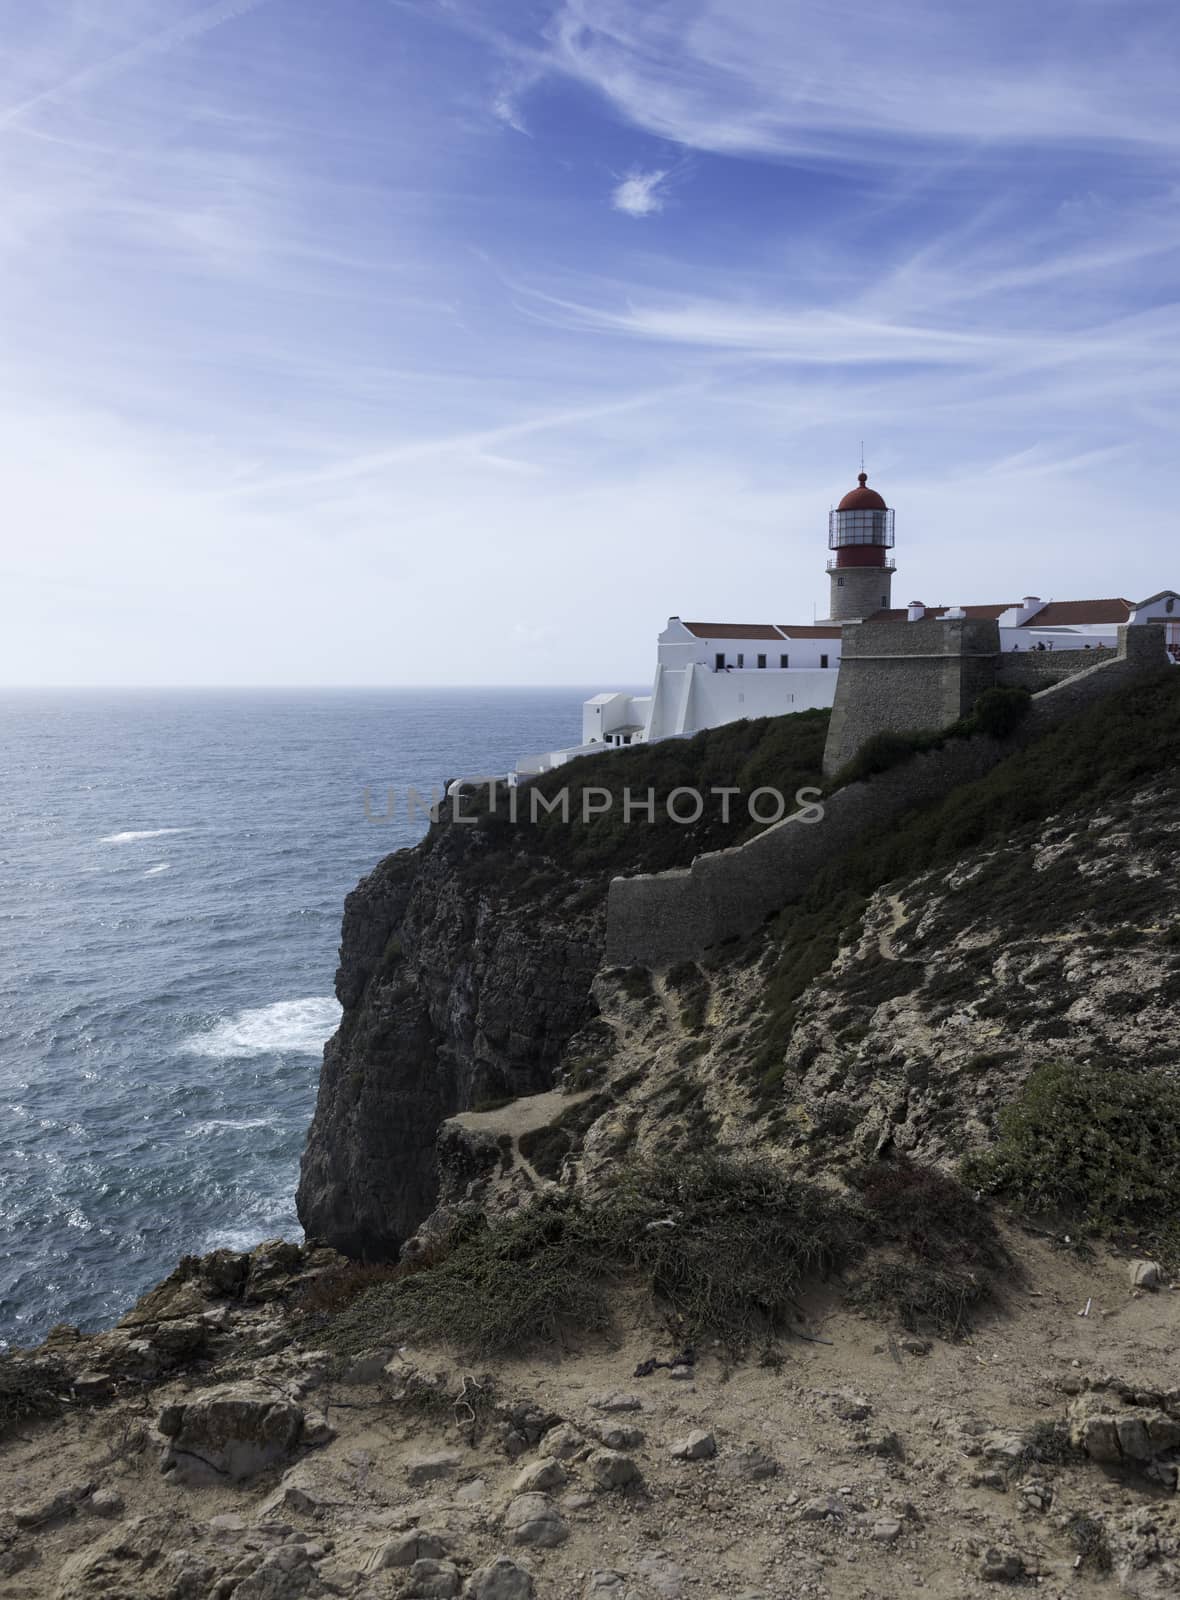 Portugal Algarve Region Sagres Lighthouse at "Cape Saint Vincent" - "Cabo Sao Vicente" - Continental Europe's most South-westerly point